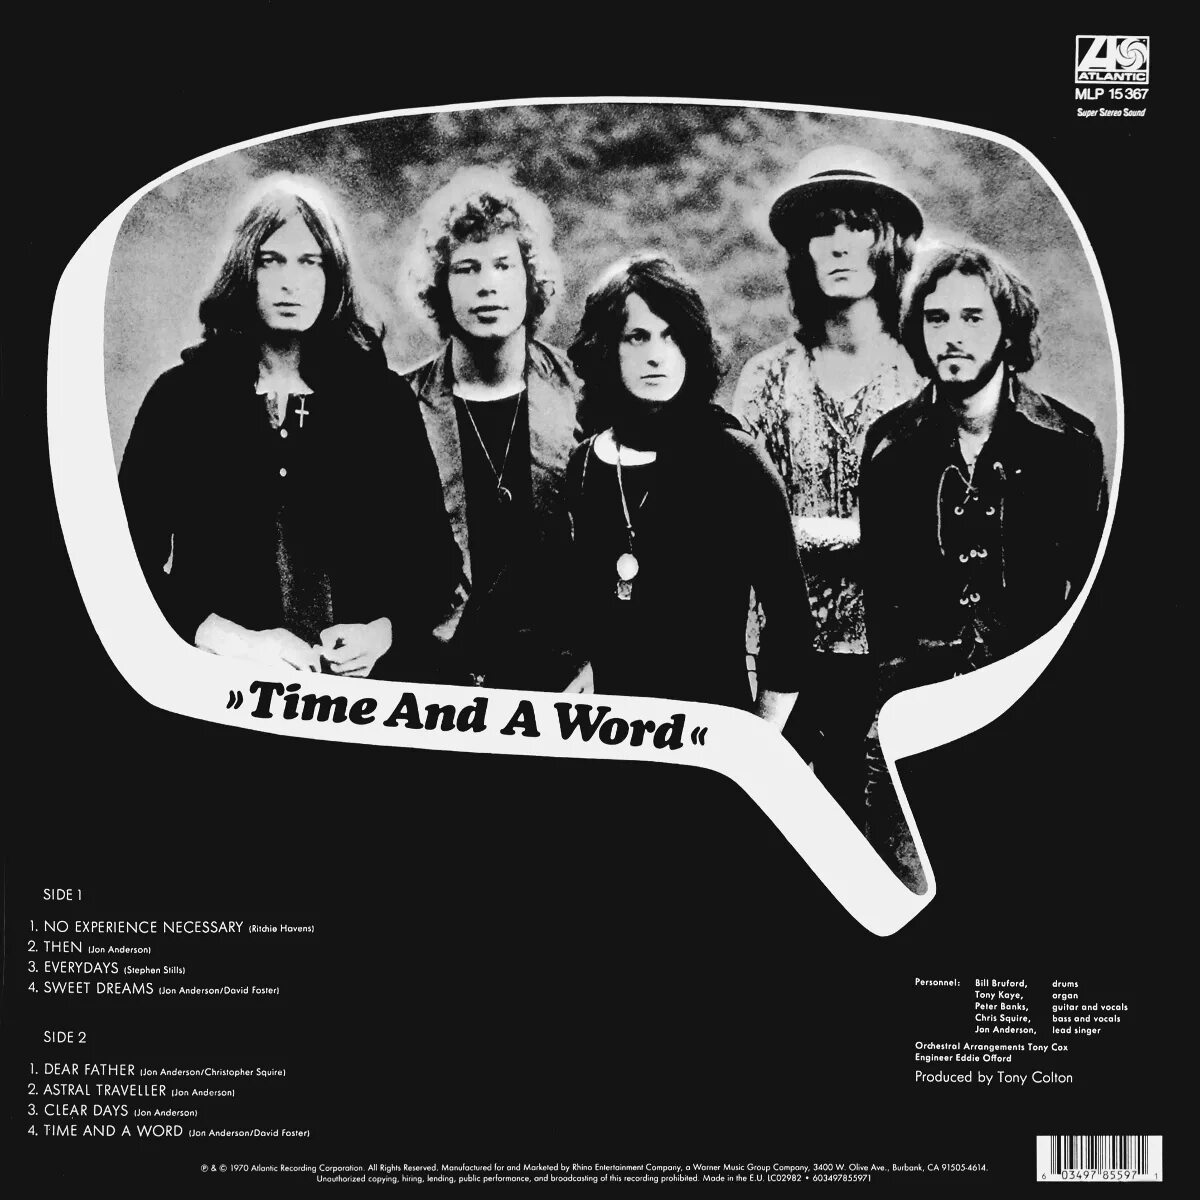 Yes time and a Word 1970. Группа Yes. Yes album 1971. Yes "time and a Word". Word limited